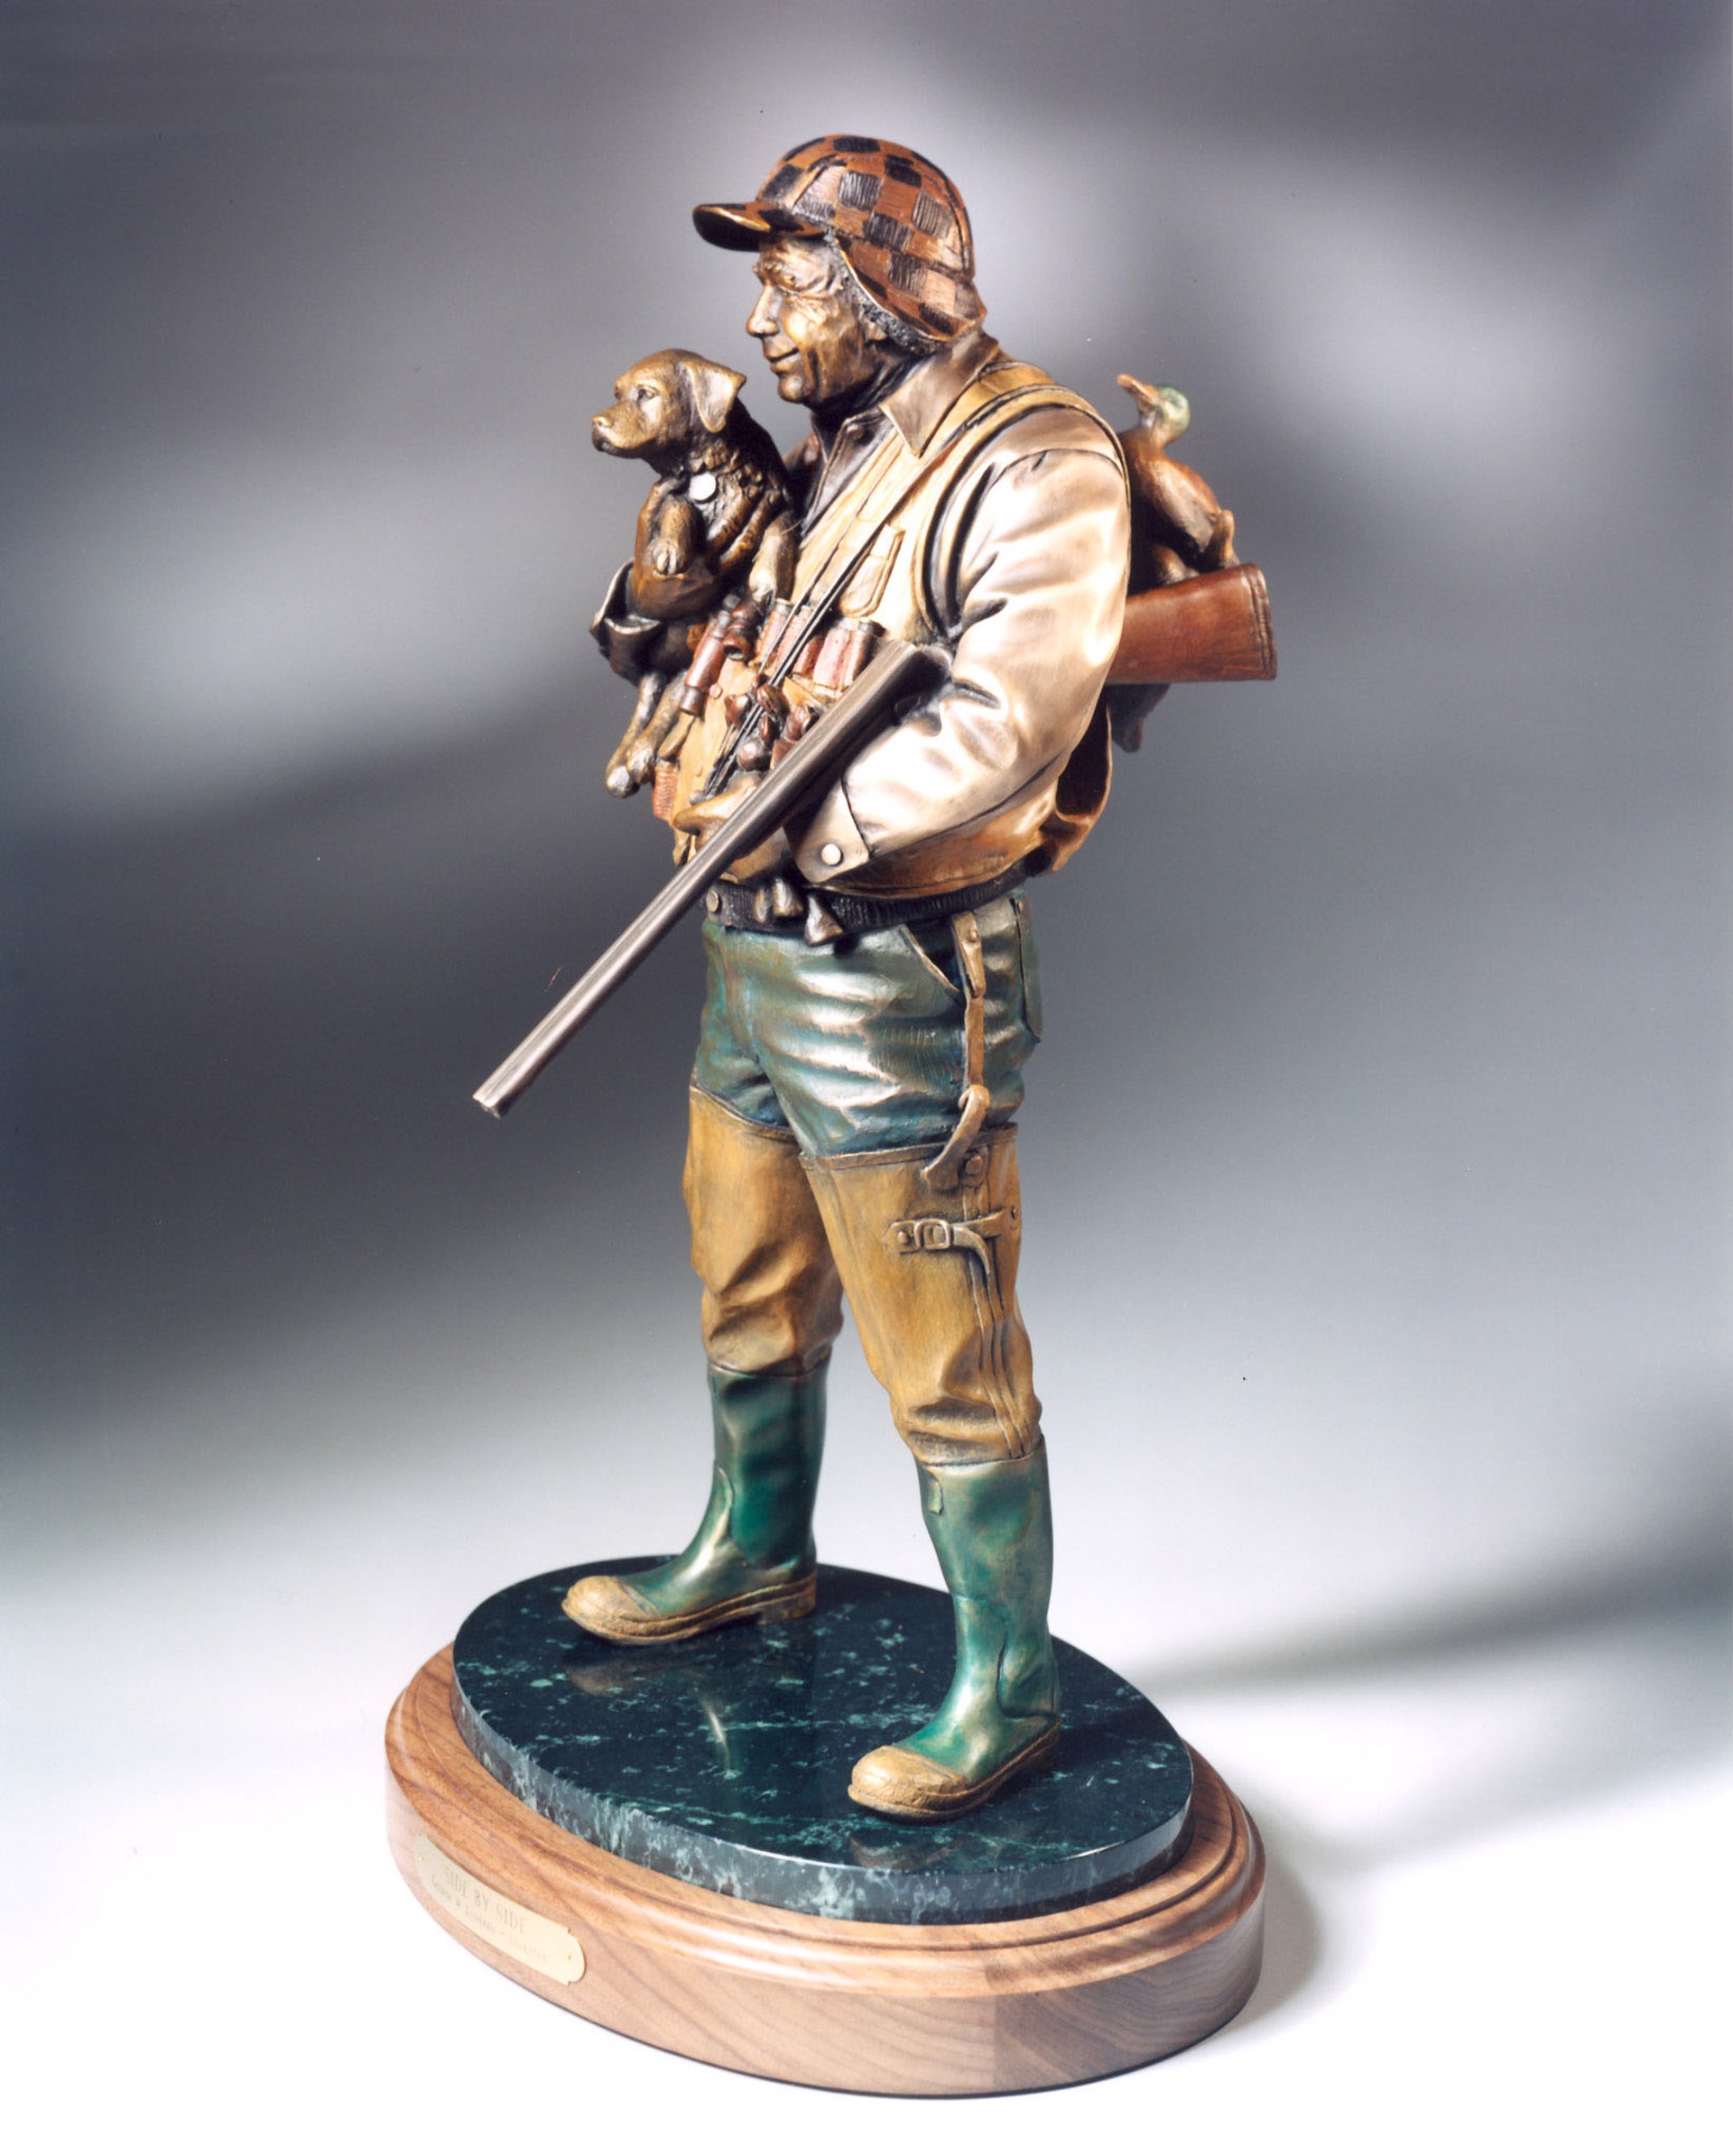 Side by Side by George Lundeen